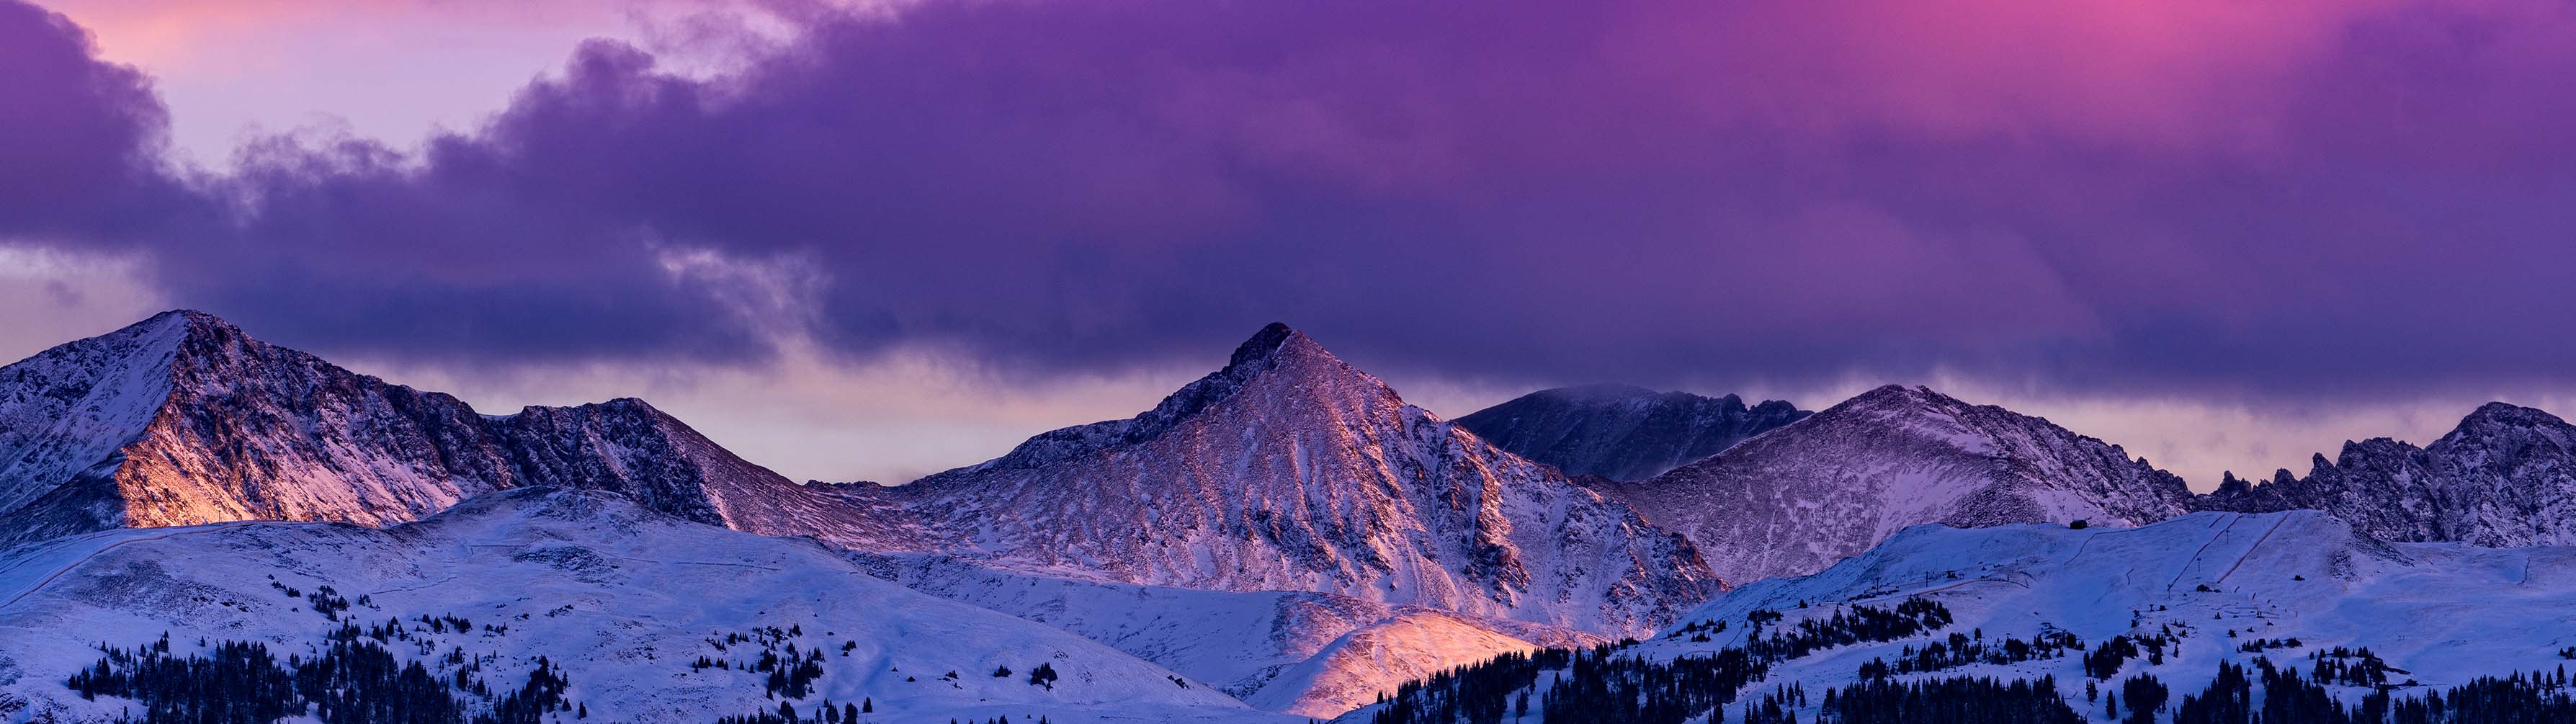 Purple skies stand behind the imposing white peak of Copper Mountain.